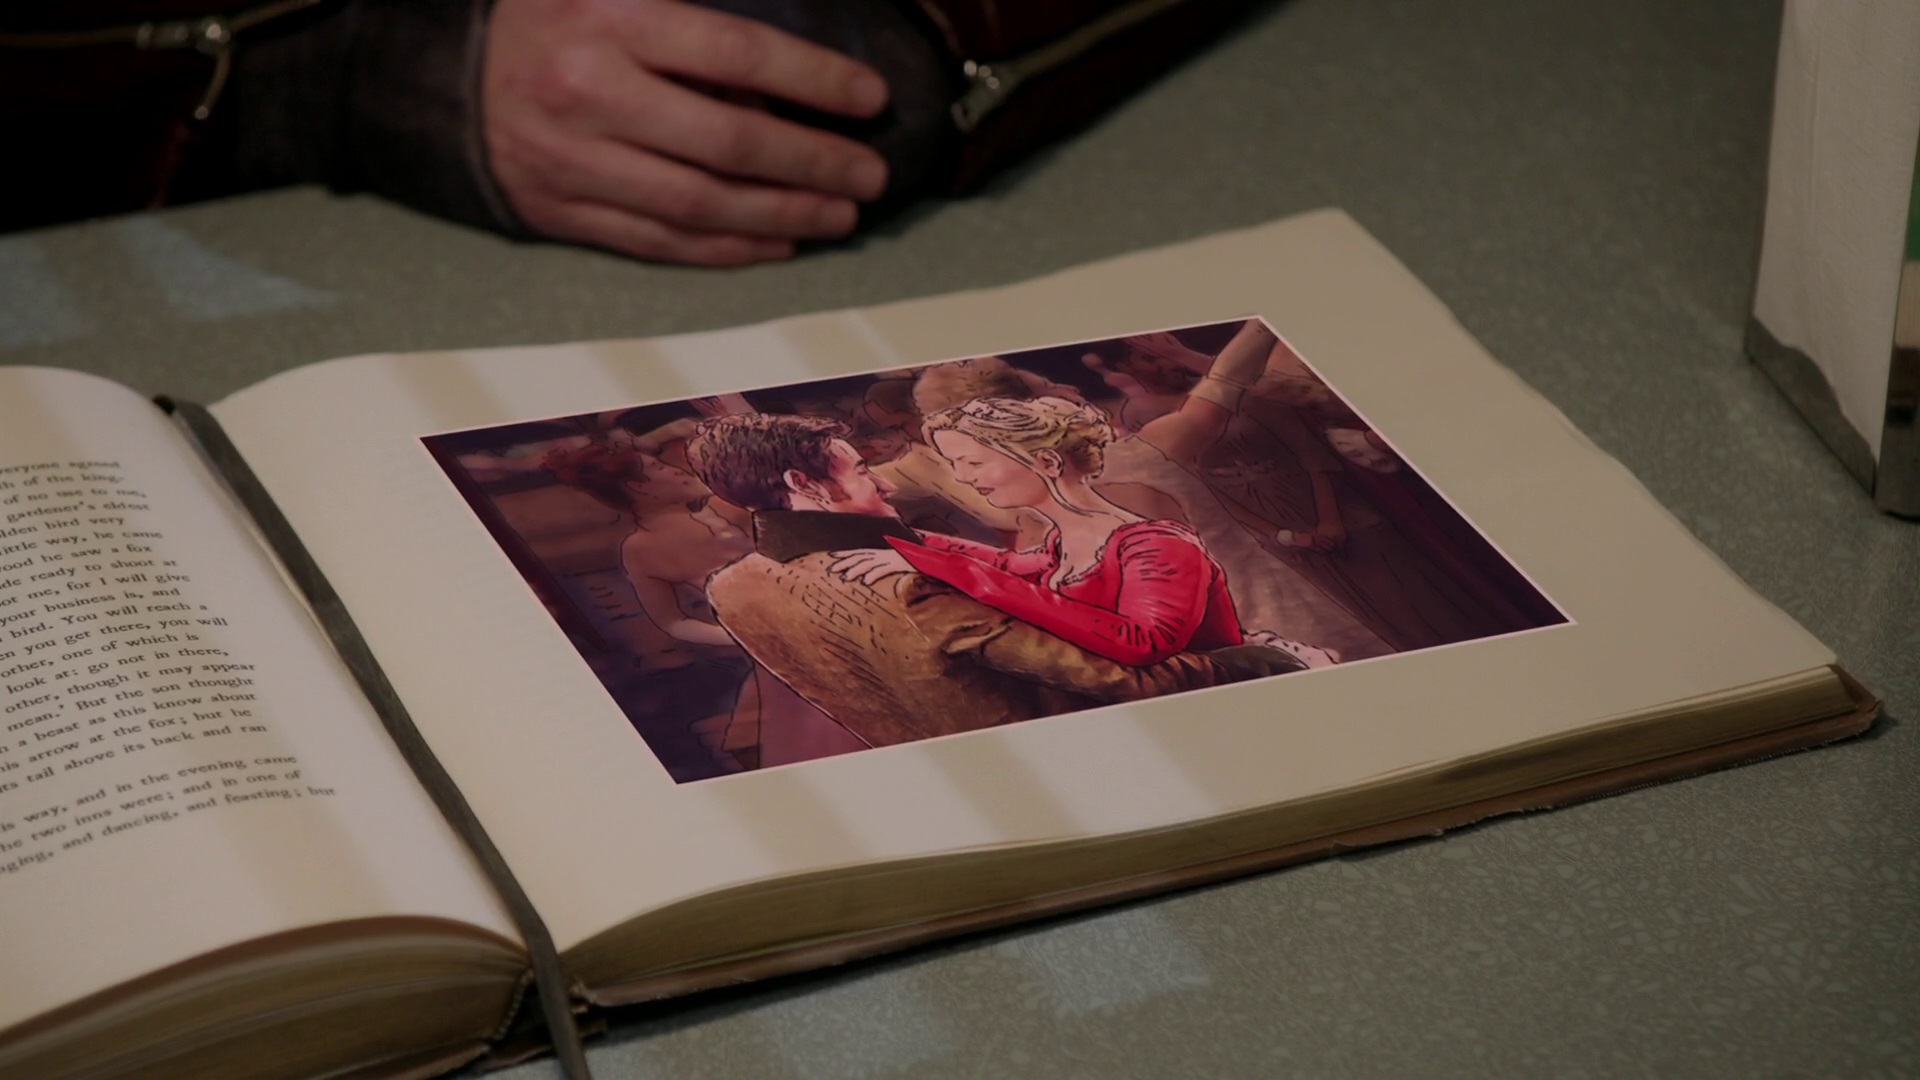 Prince Charles and Princess Leia in the book - Once Upon a Time podcast 3x22 There's No Place Like Home